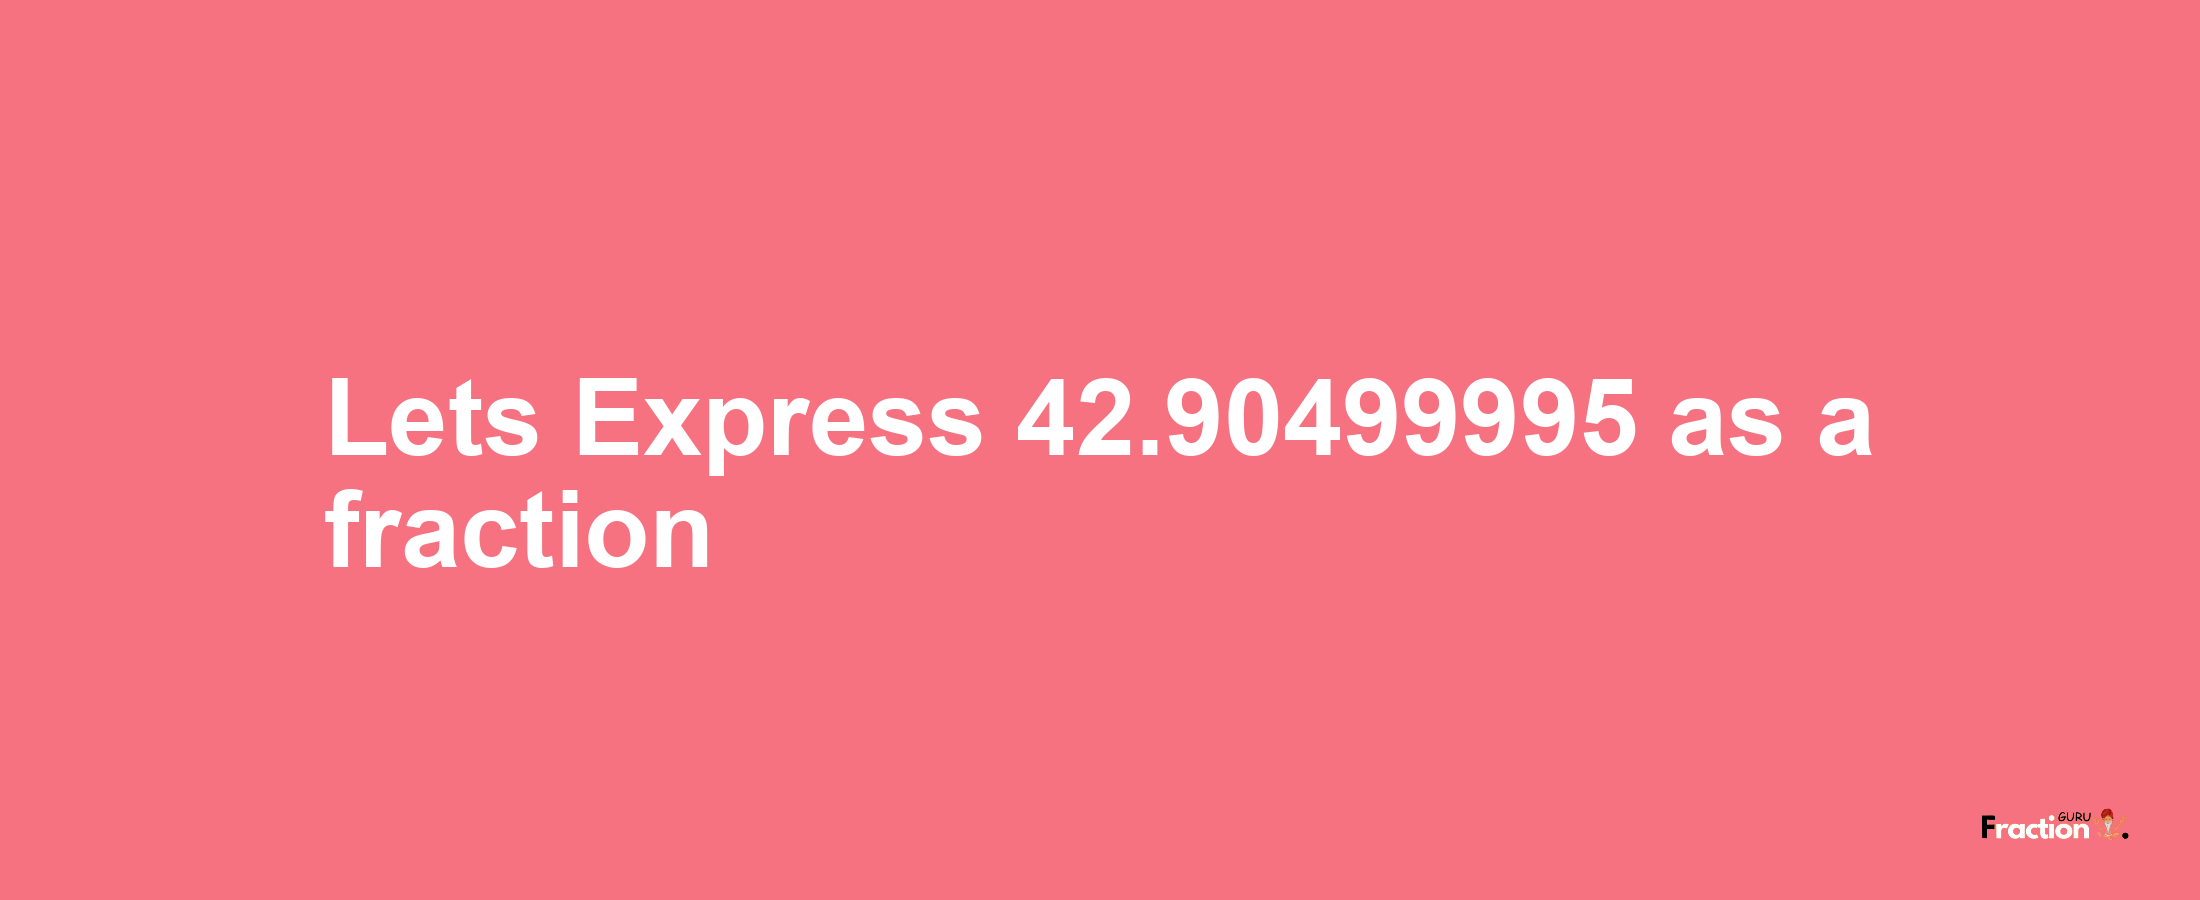 Lets Express 42.90499995 as afraction